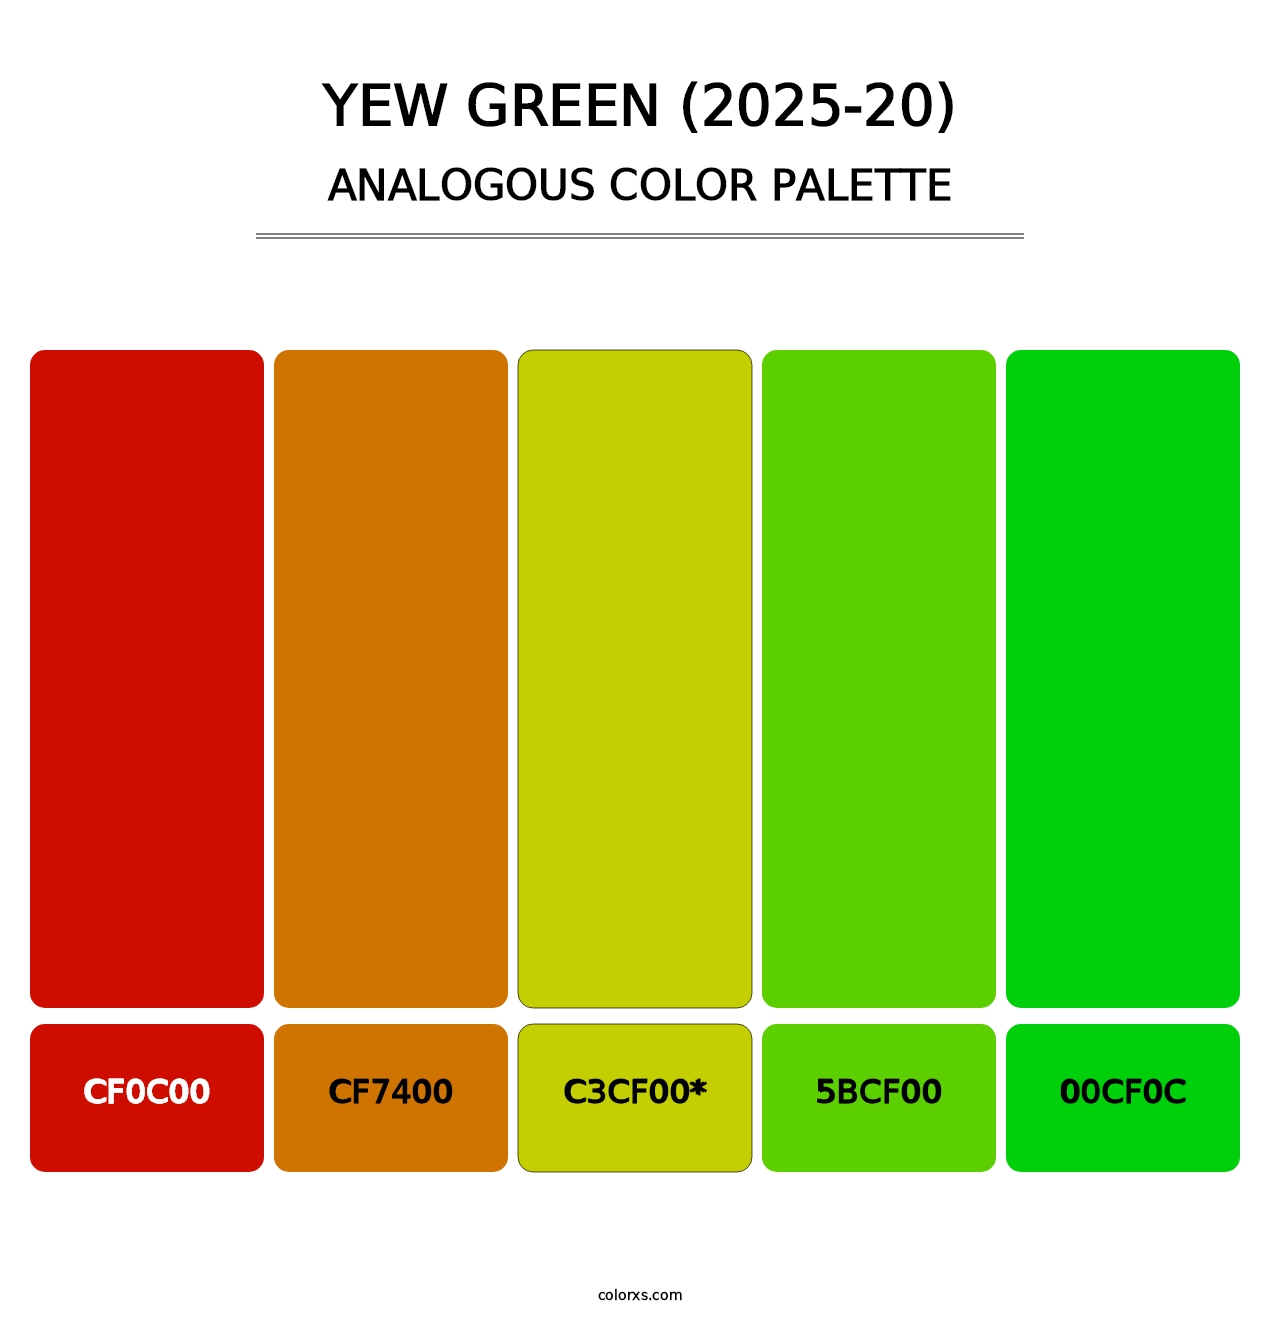 Yew Green (2025-20) - Analogous Color Palette